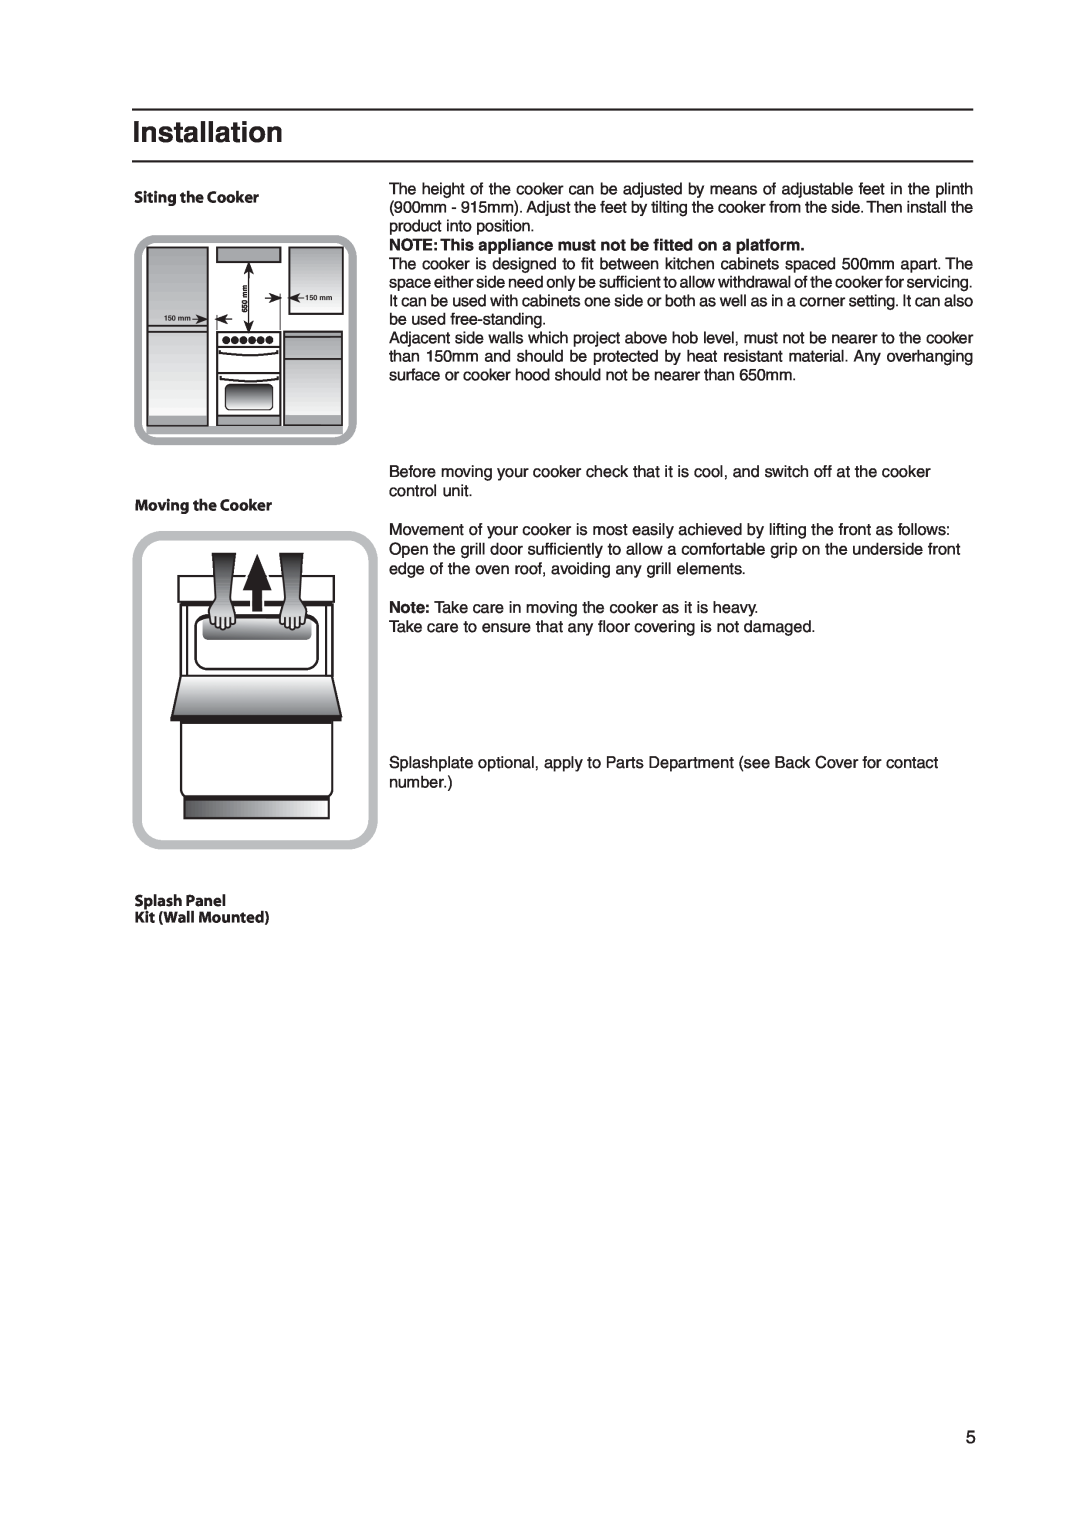 Indesit KD3E11/G, KD3E1/G manual Installation, Siting the Cooker, Moving the Cooker, Splash Panel Kit Wall Mounted, 150 mm 